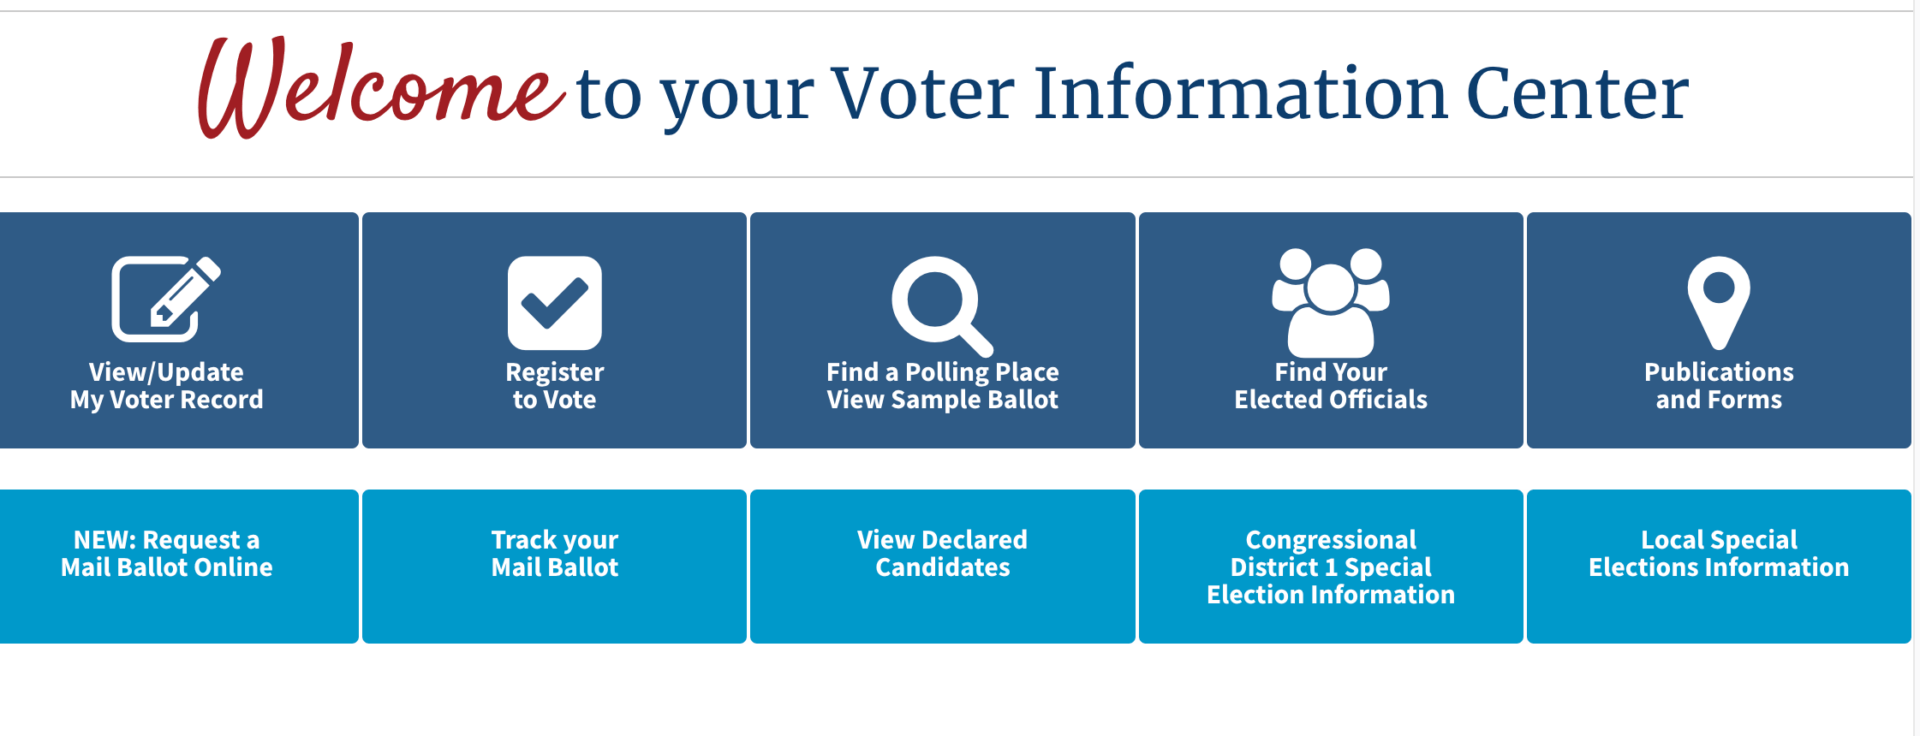 [CREDIT: RI Secretary of State] There are special elections Nov. 7 for Congressional District 1, State Senate District 1, and local referenda questions on Nov. 7, 2023.